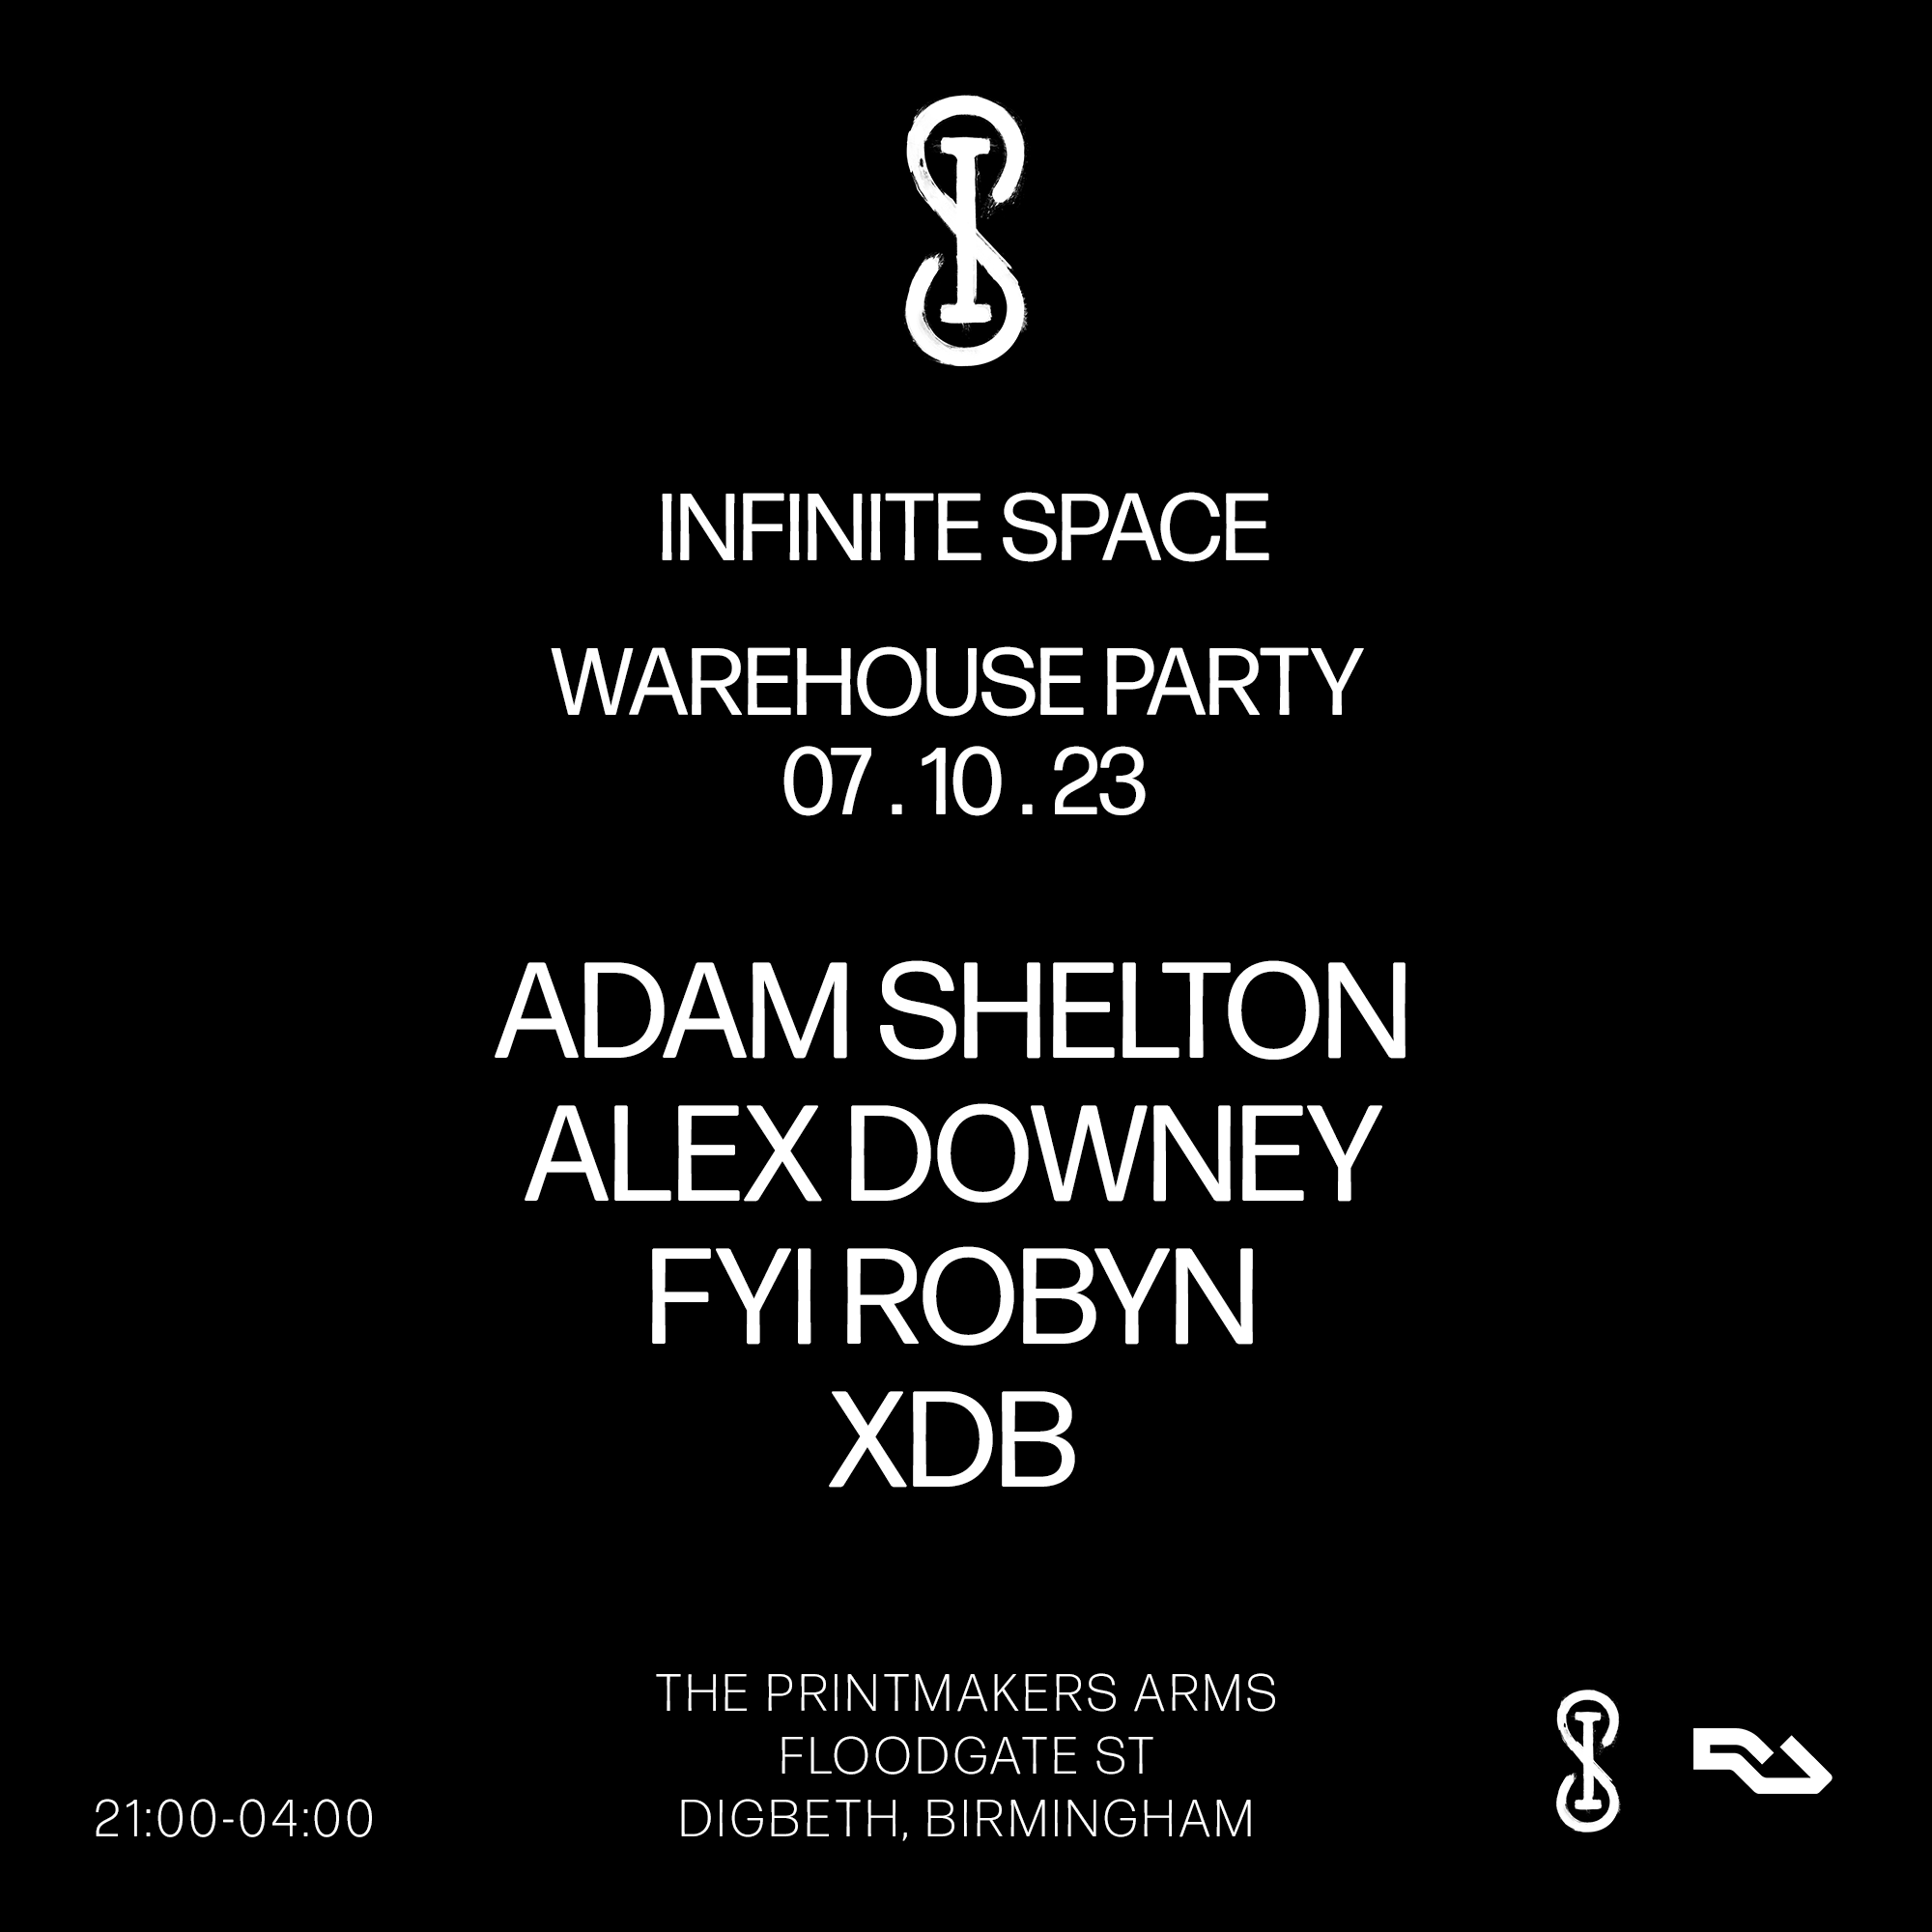 Infinite Space Warehouse Party with XDB - Página frontal